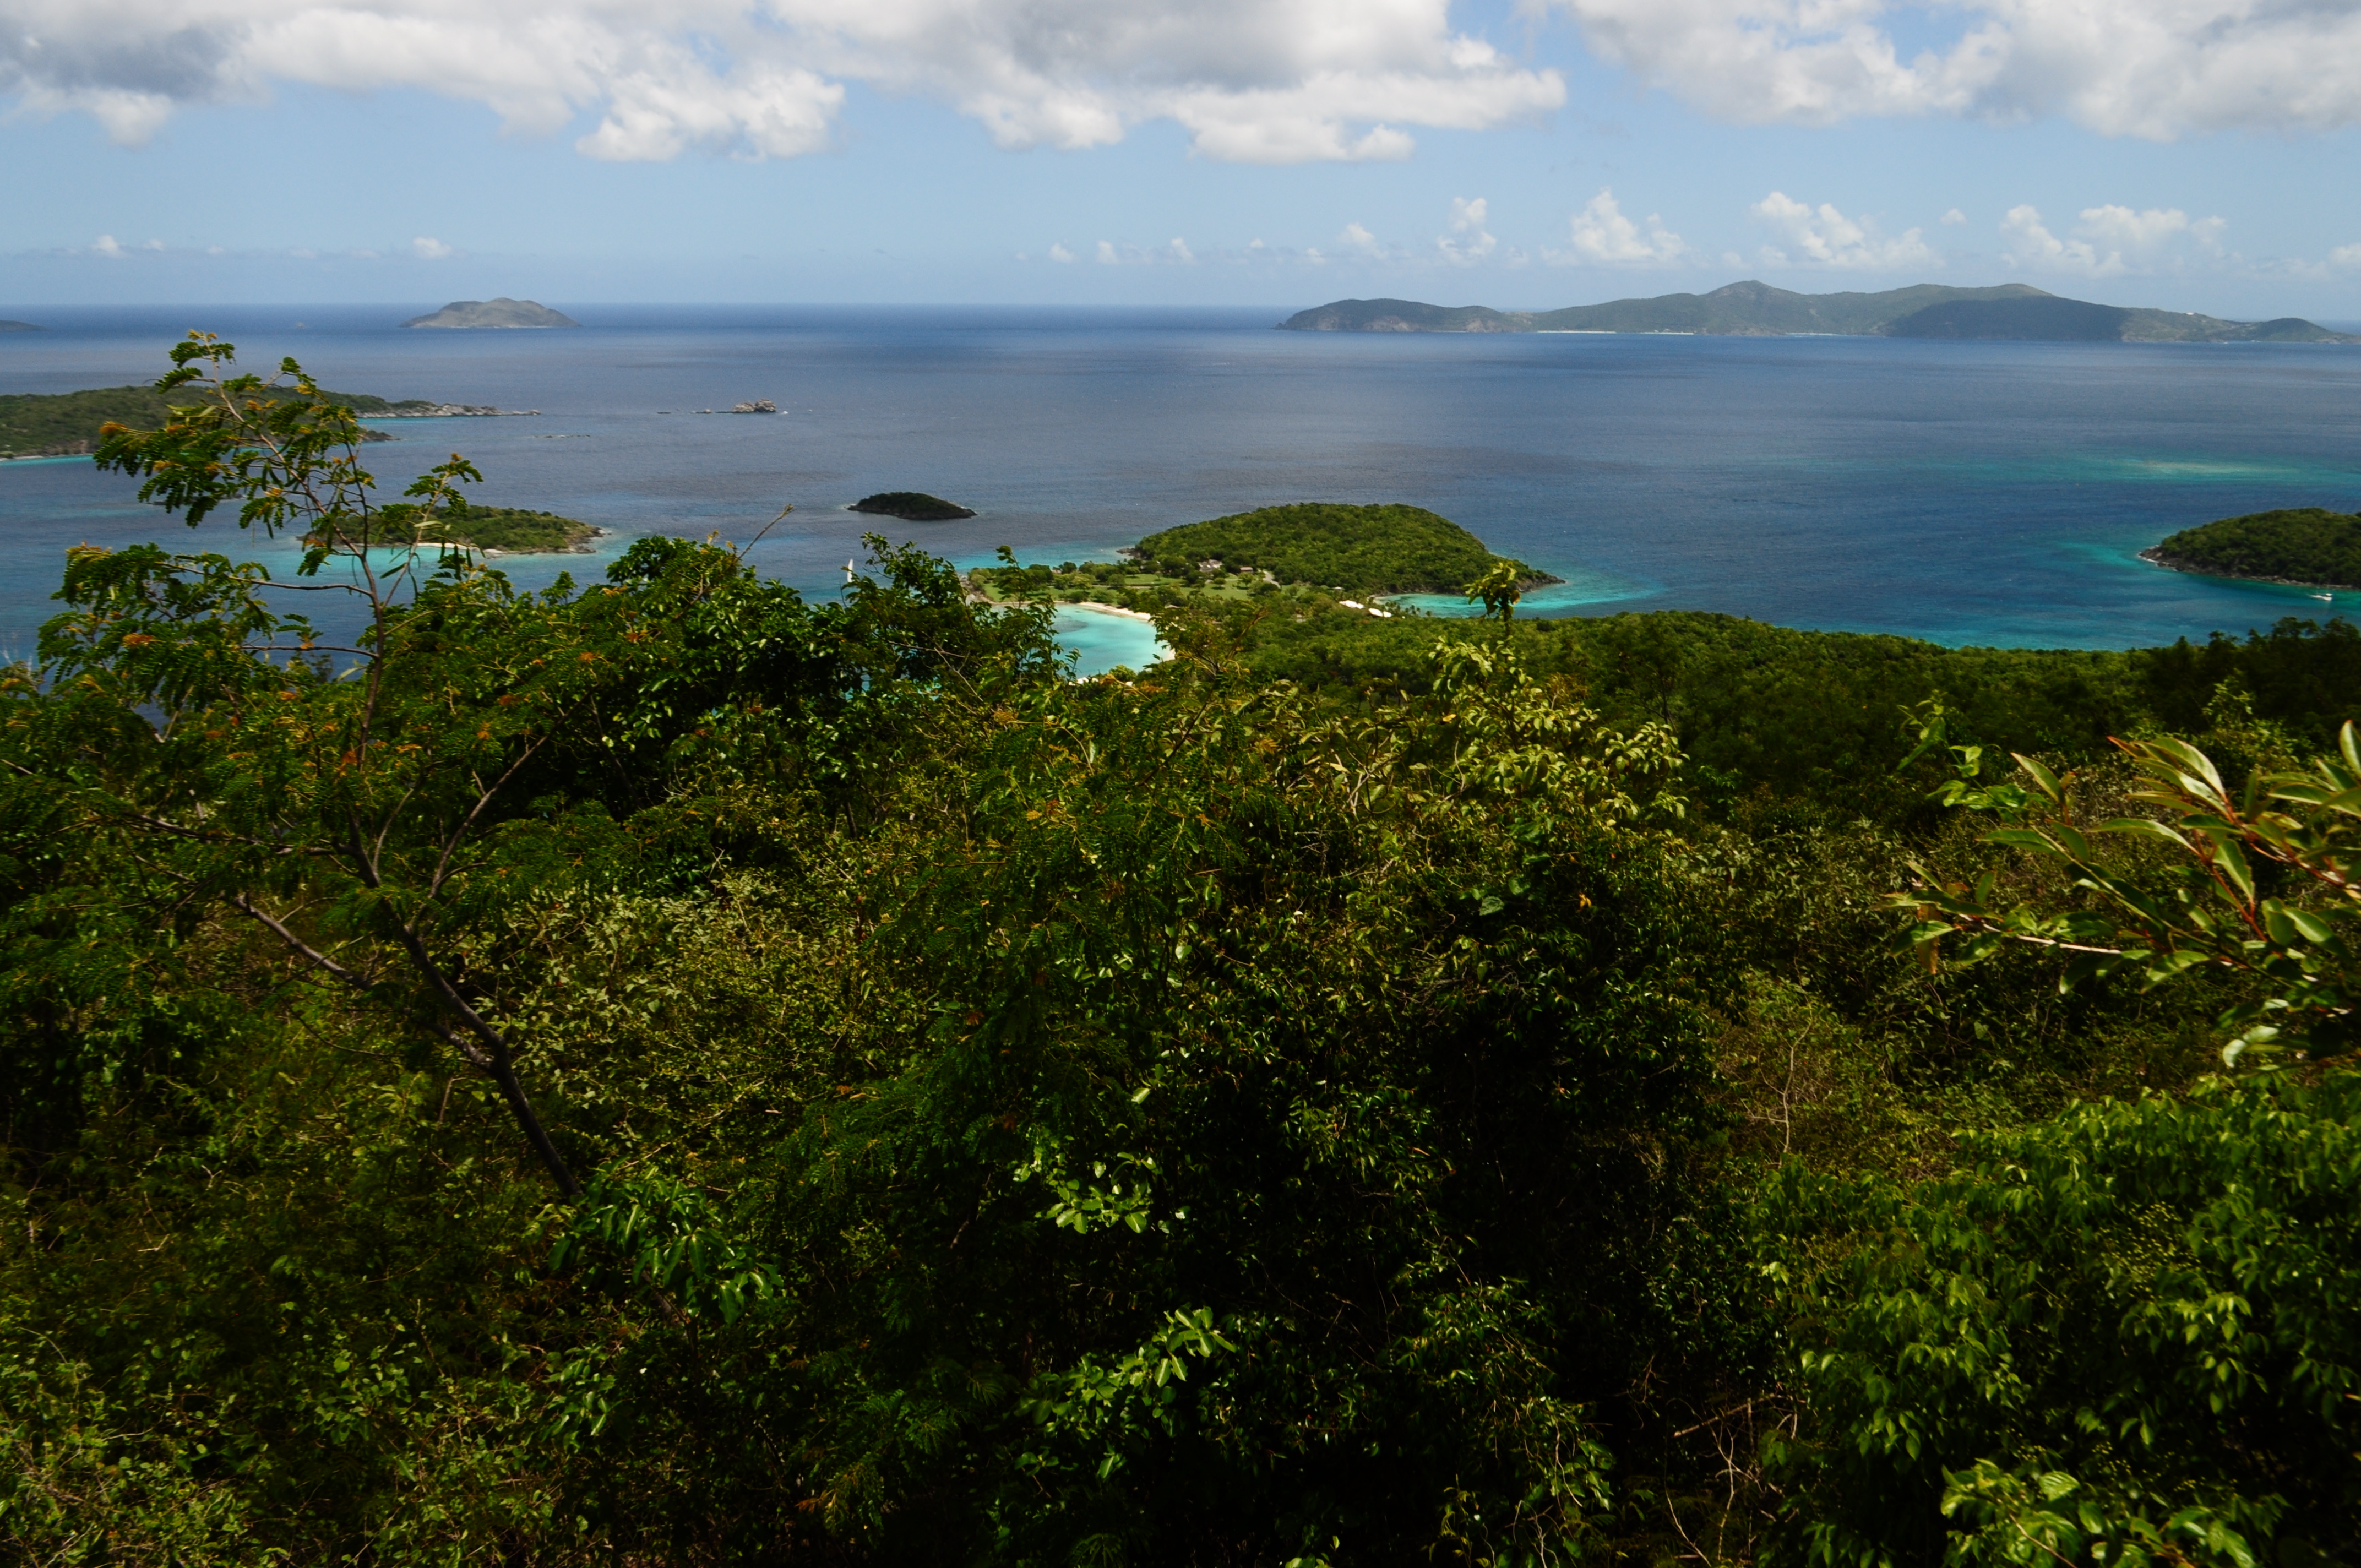 Pictured beneath a blue sky dotted with white clouds, the teal and deep blue waters off of Caneel Bay give way to the British Virgin Islands in the distance.